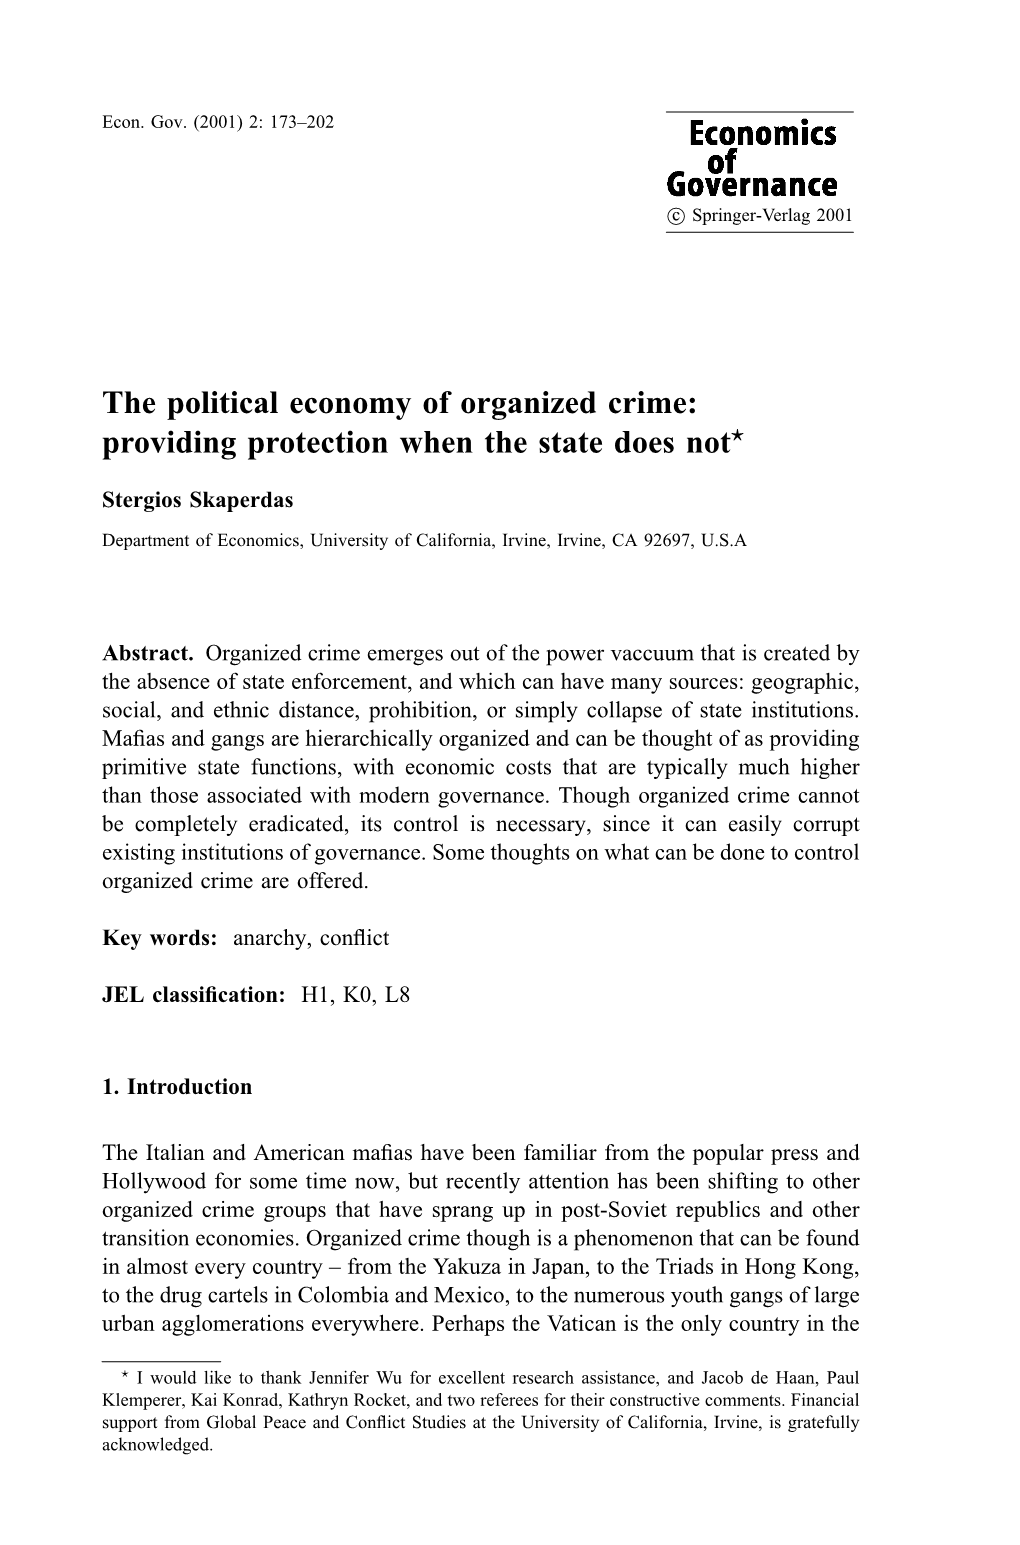 The Political Economy of Organized Crime: Providing Protection When the State Does Not